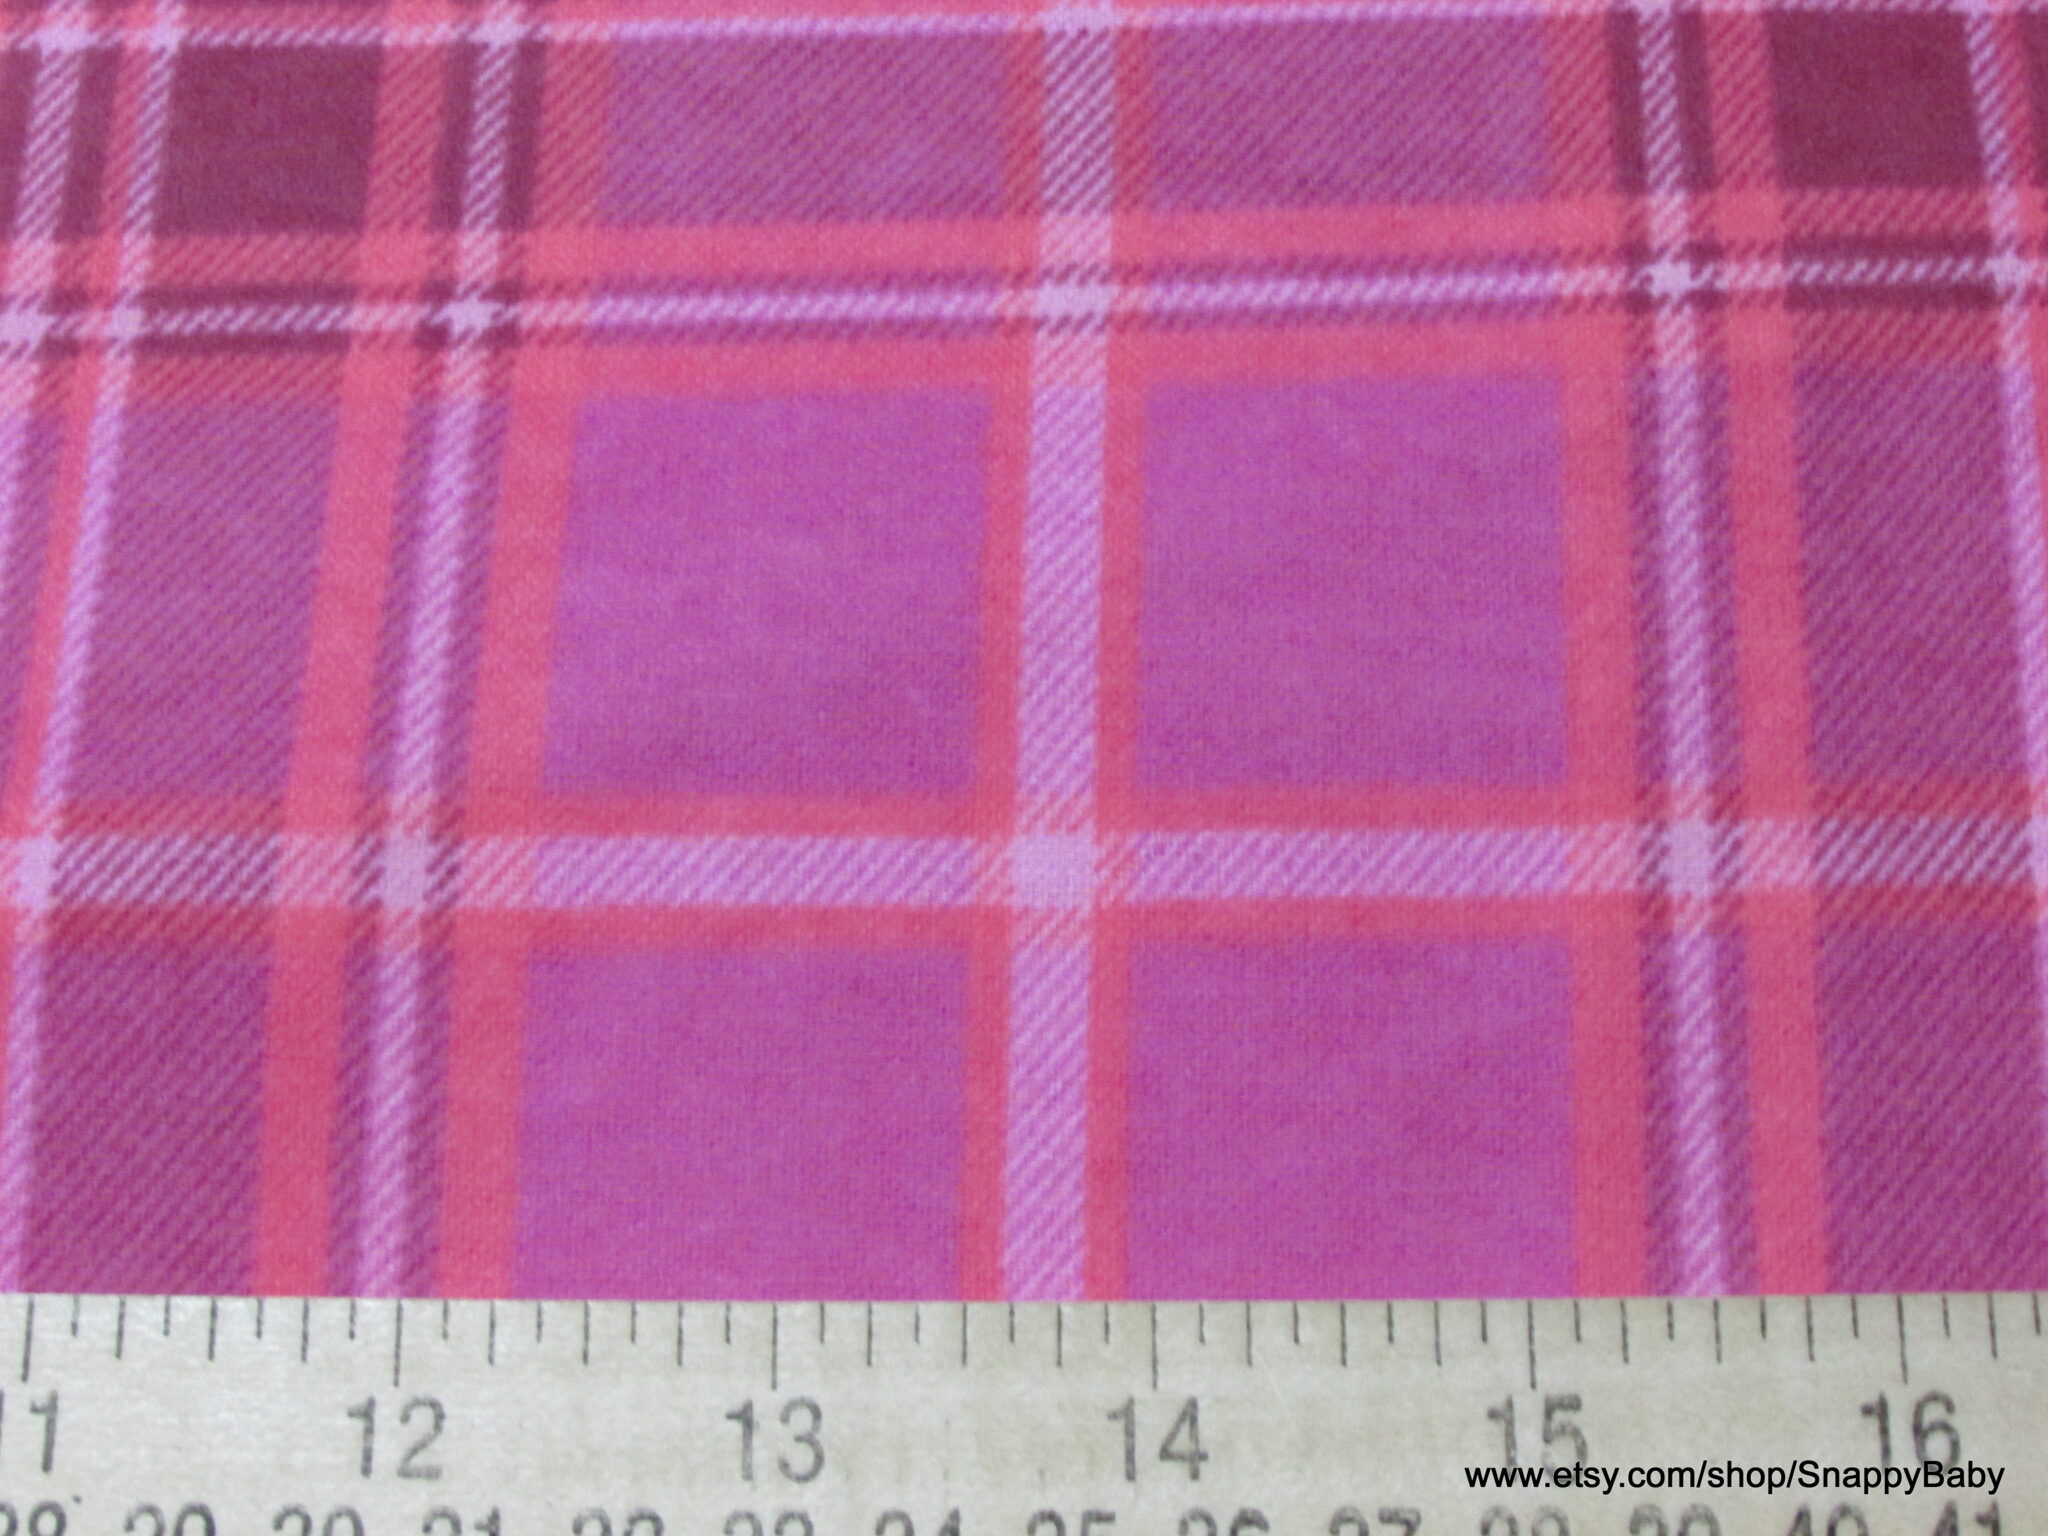 Flannel Fabric - Pink Coral Plaid - By the yard - 100% Cotton Flannel ...